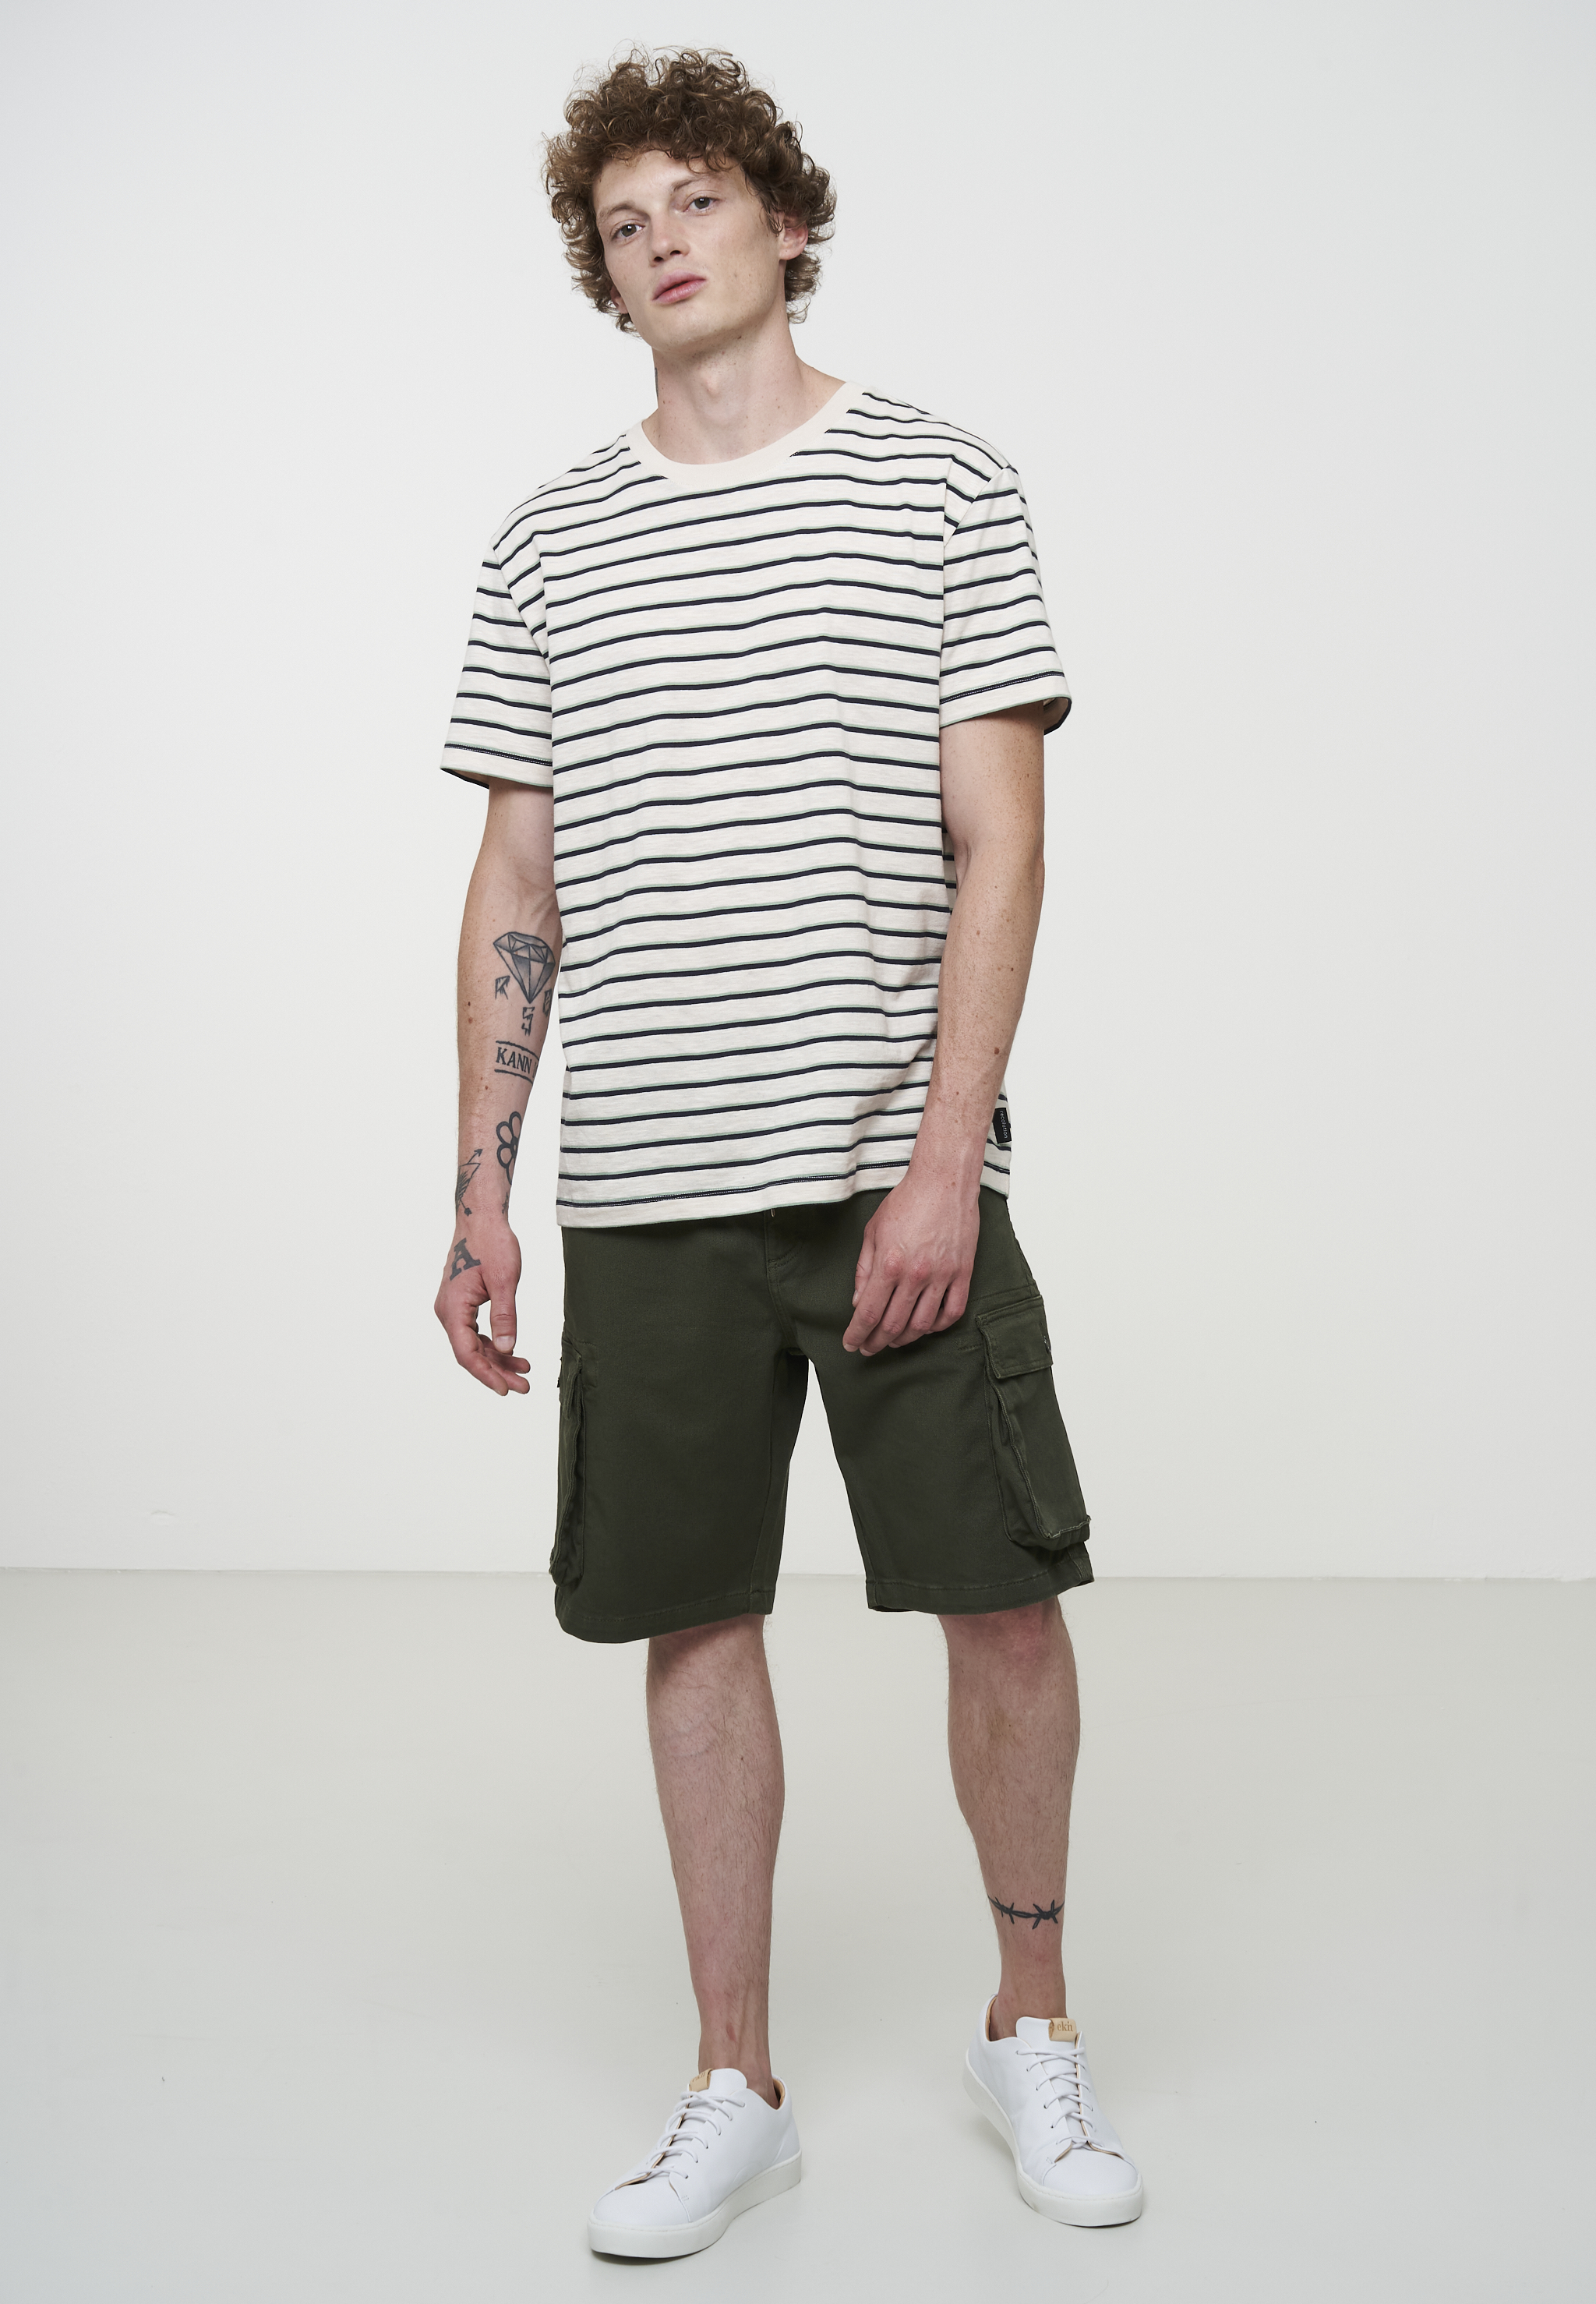 T-Shirt CACAO STRIPES summer sand